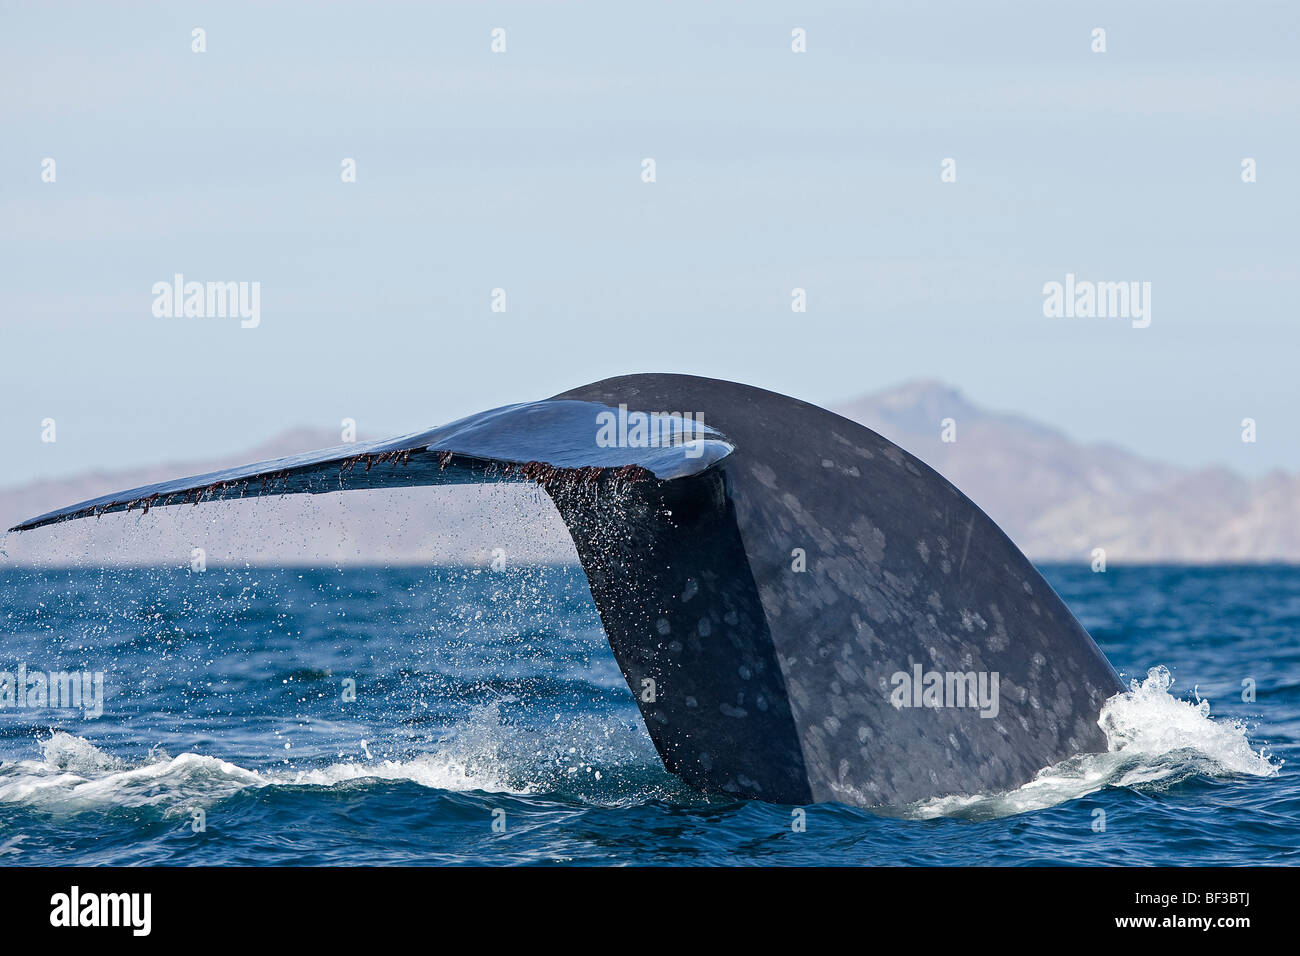 Blue Whale (Balaenoptera musculus), fluking. Stock Photo